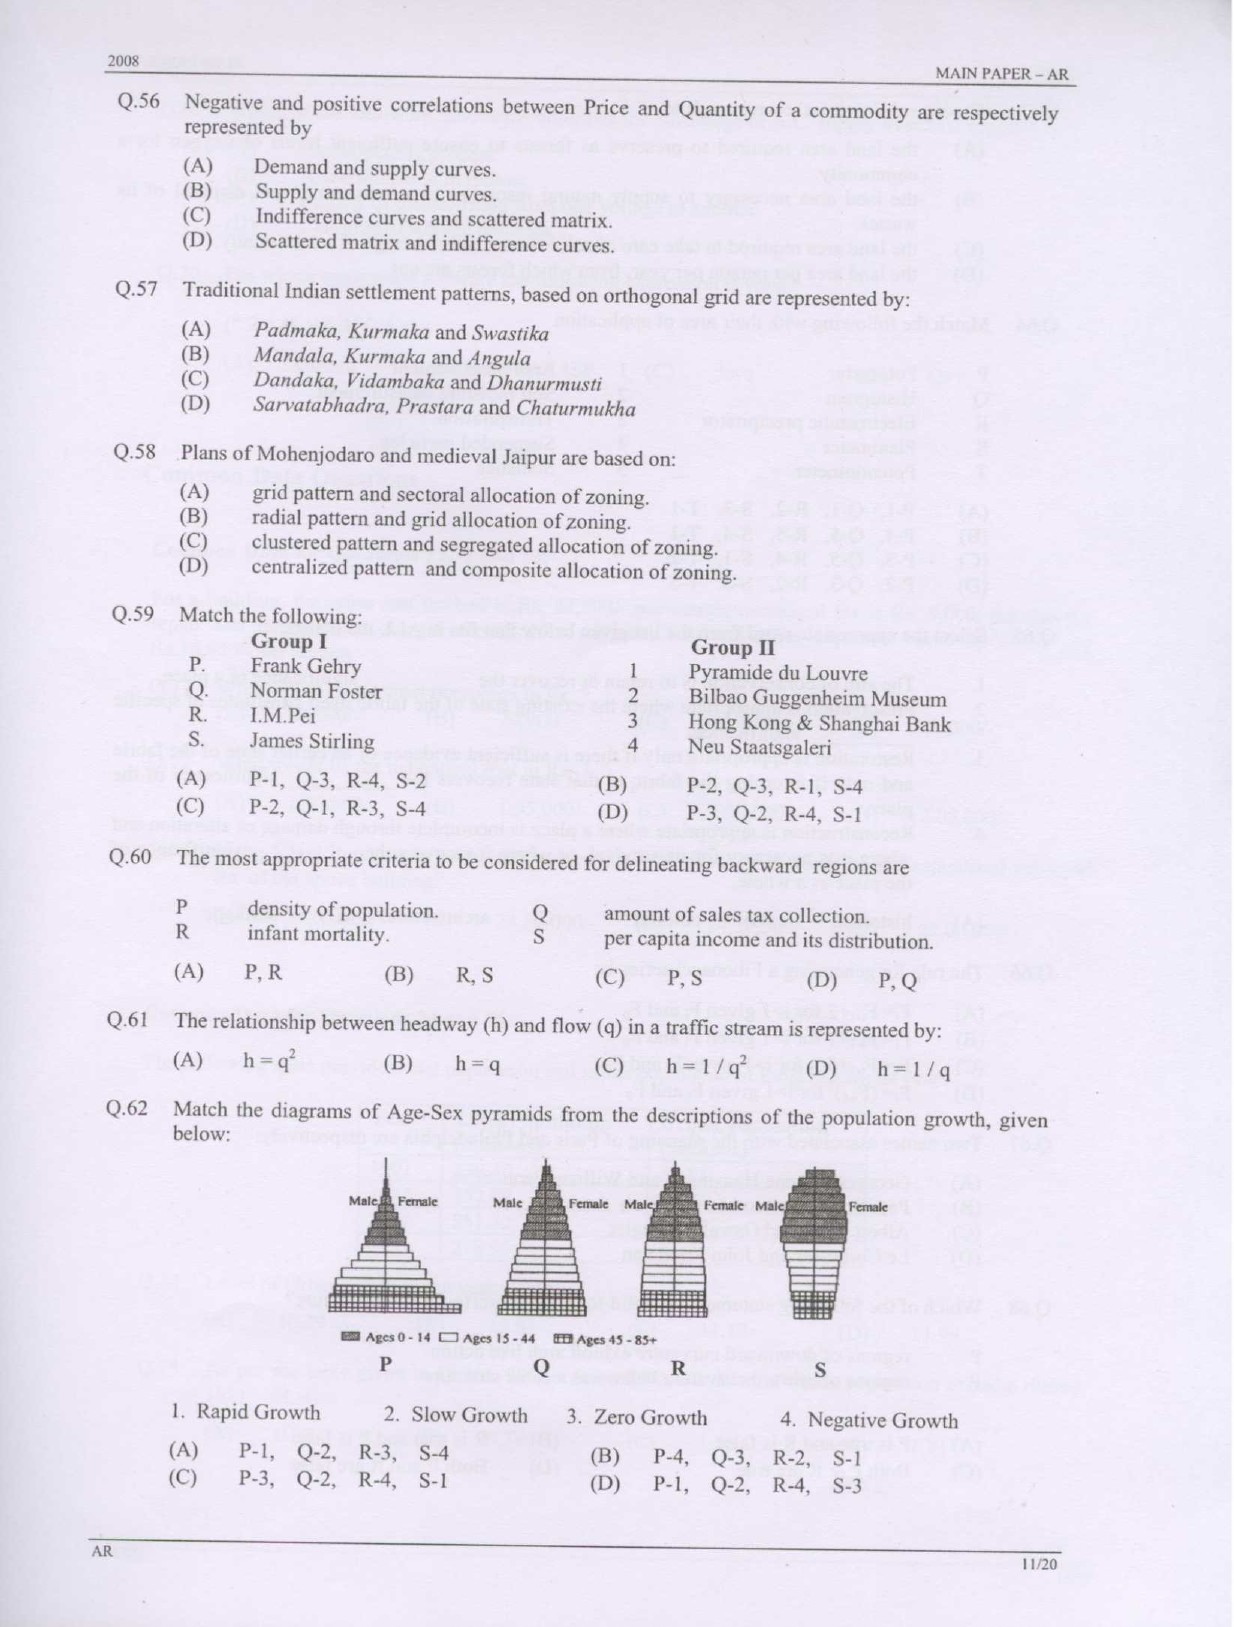 GATE Exam Question Paper 2008 Architecture and Planning 11